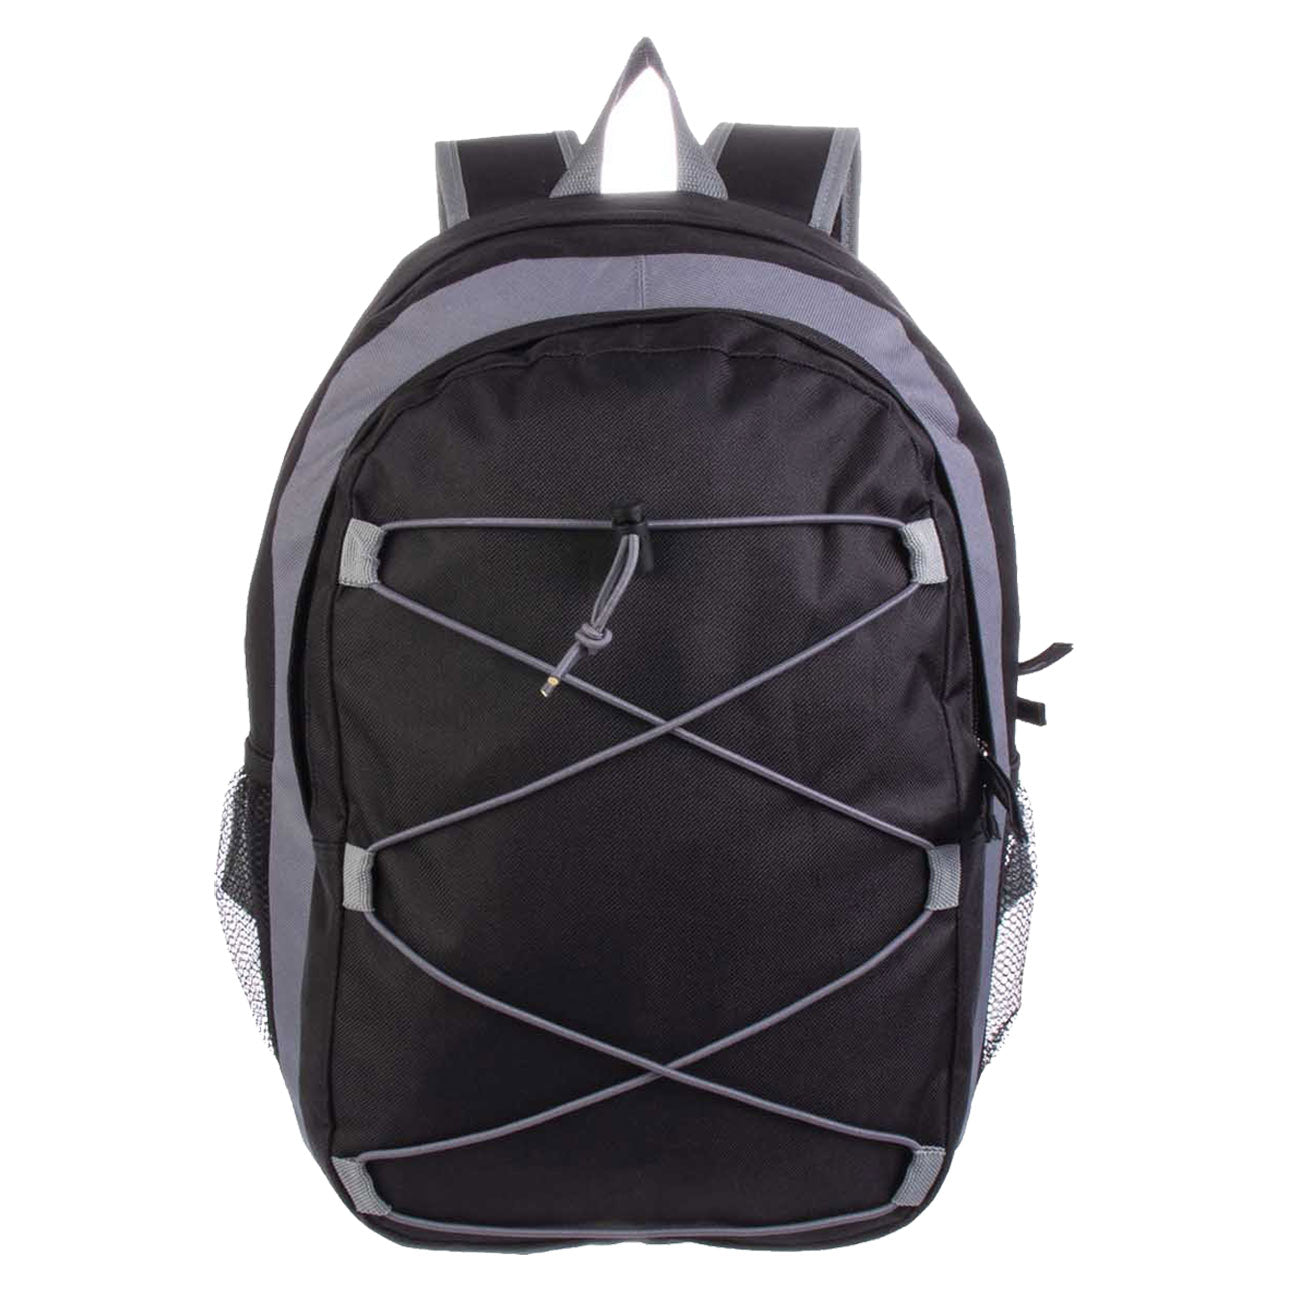 17" Bungee Wholesale Premium Design Backpacks in 4 Assorted Colors - Wholesale Bookbags Case of 24